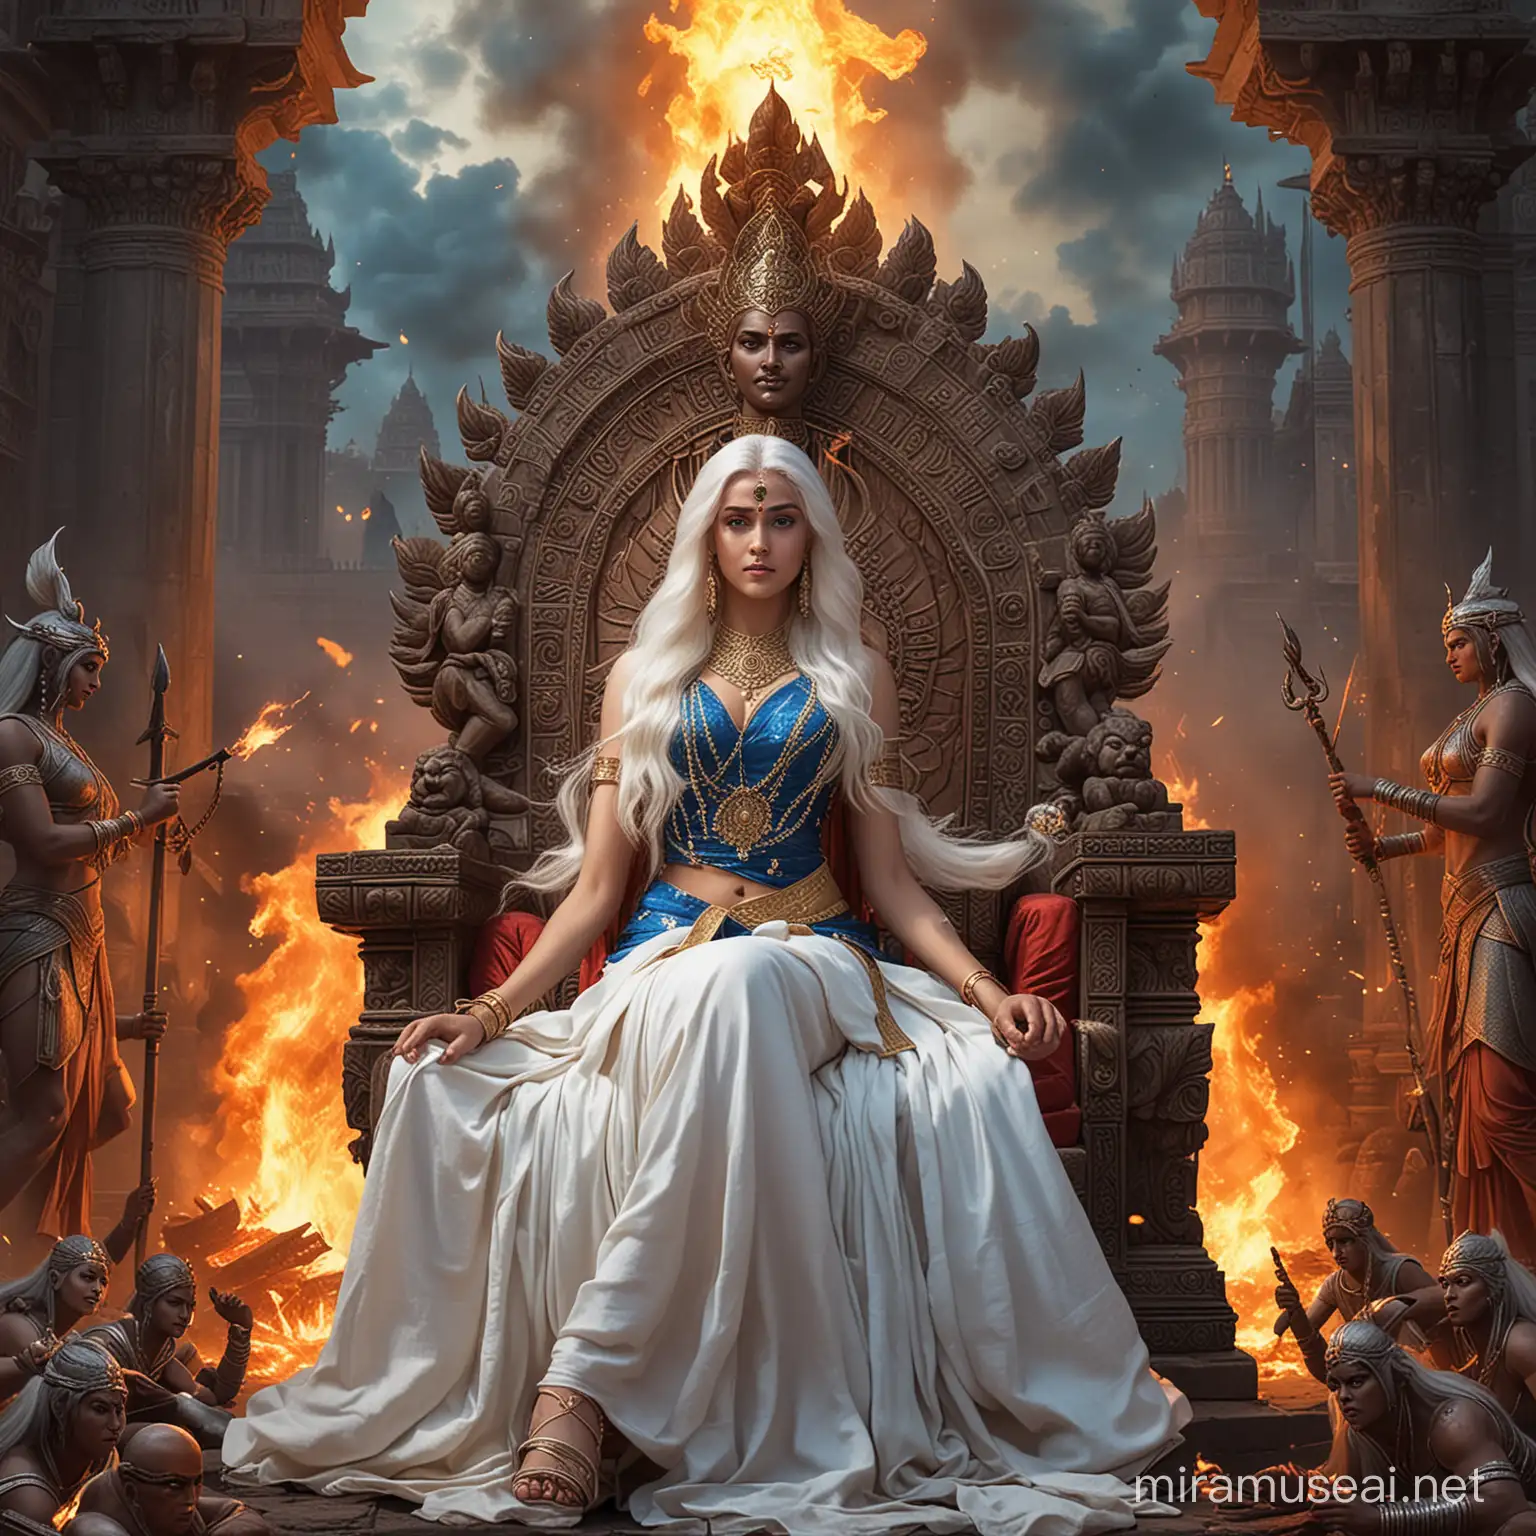 Powerful Hindu Empress on Majestic Throne with Fire and Gods